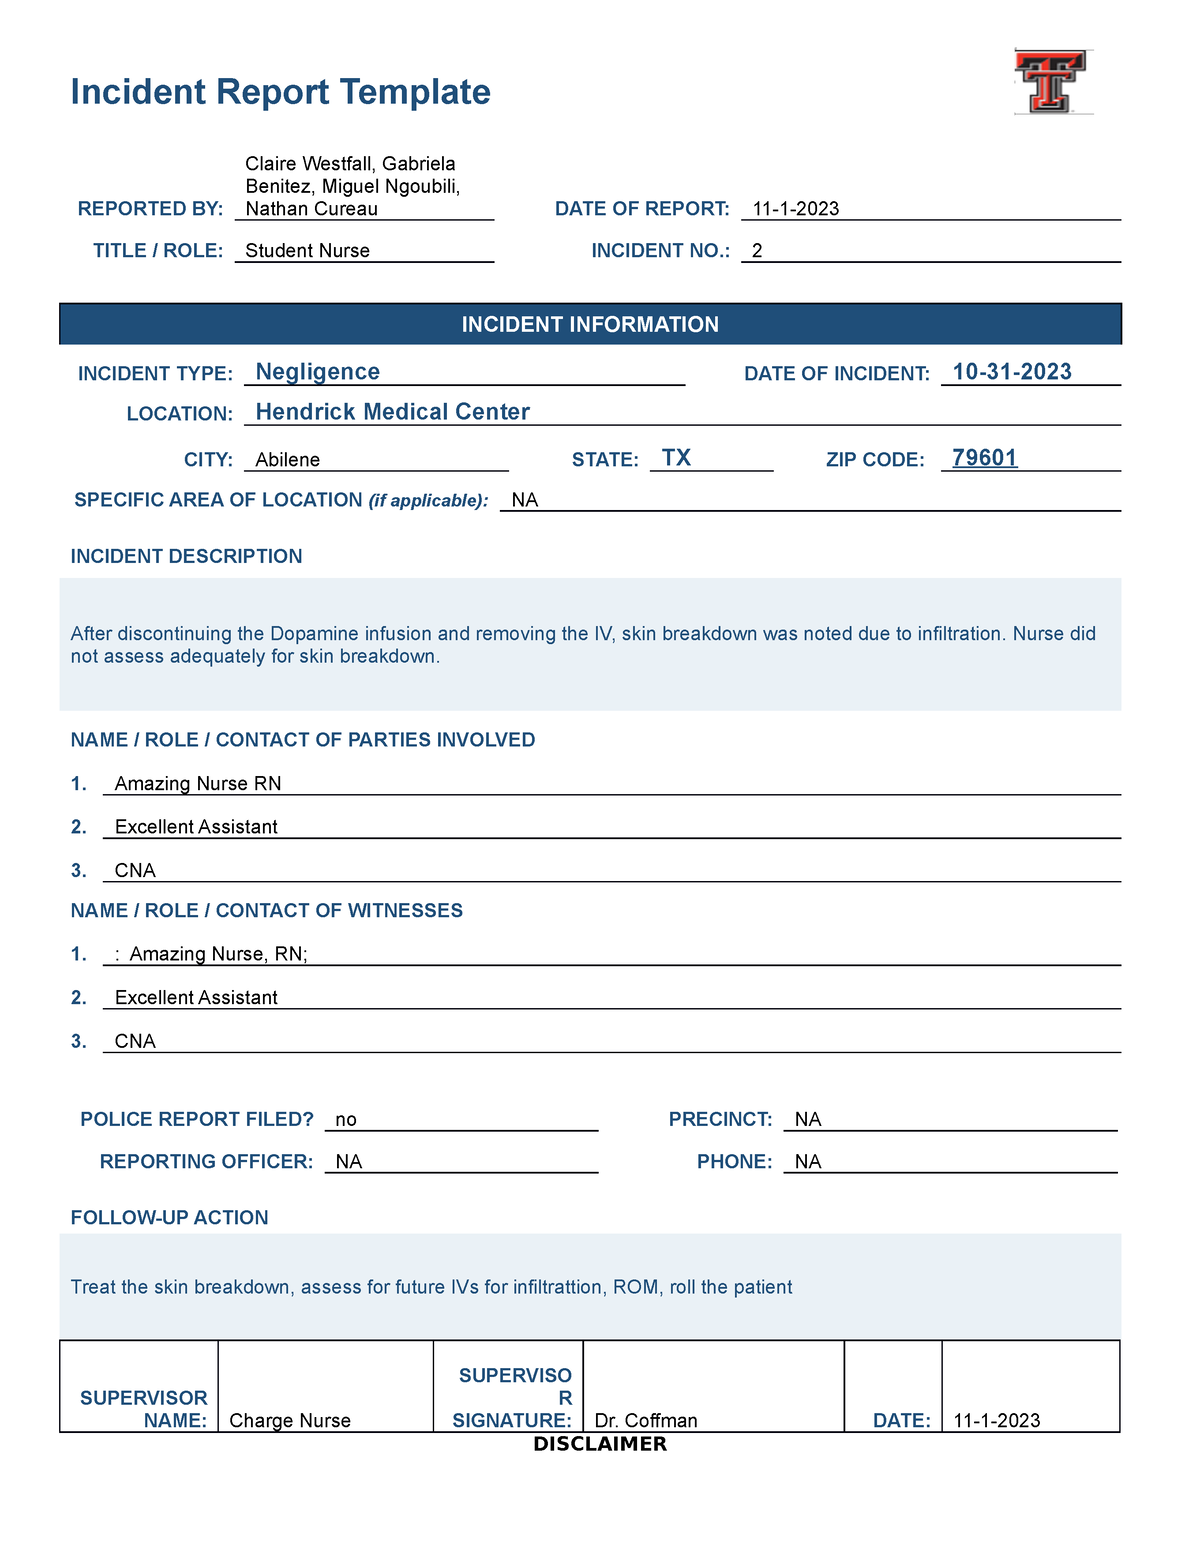 Incident Report Template - Incident Report Template REPORTED BY: Claire ...